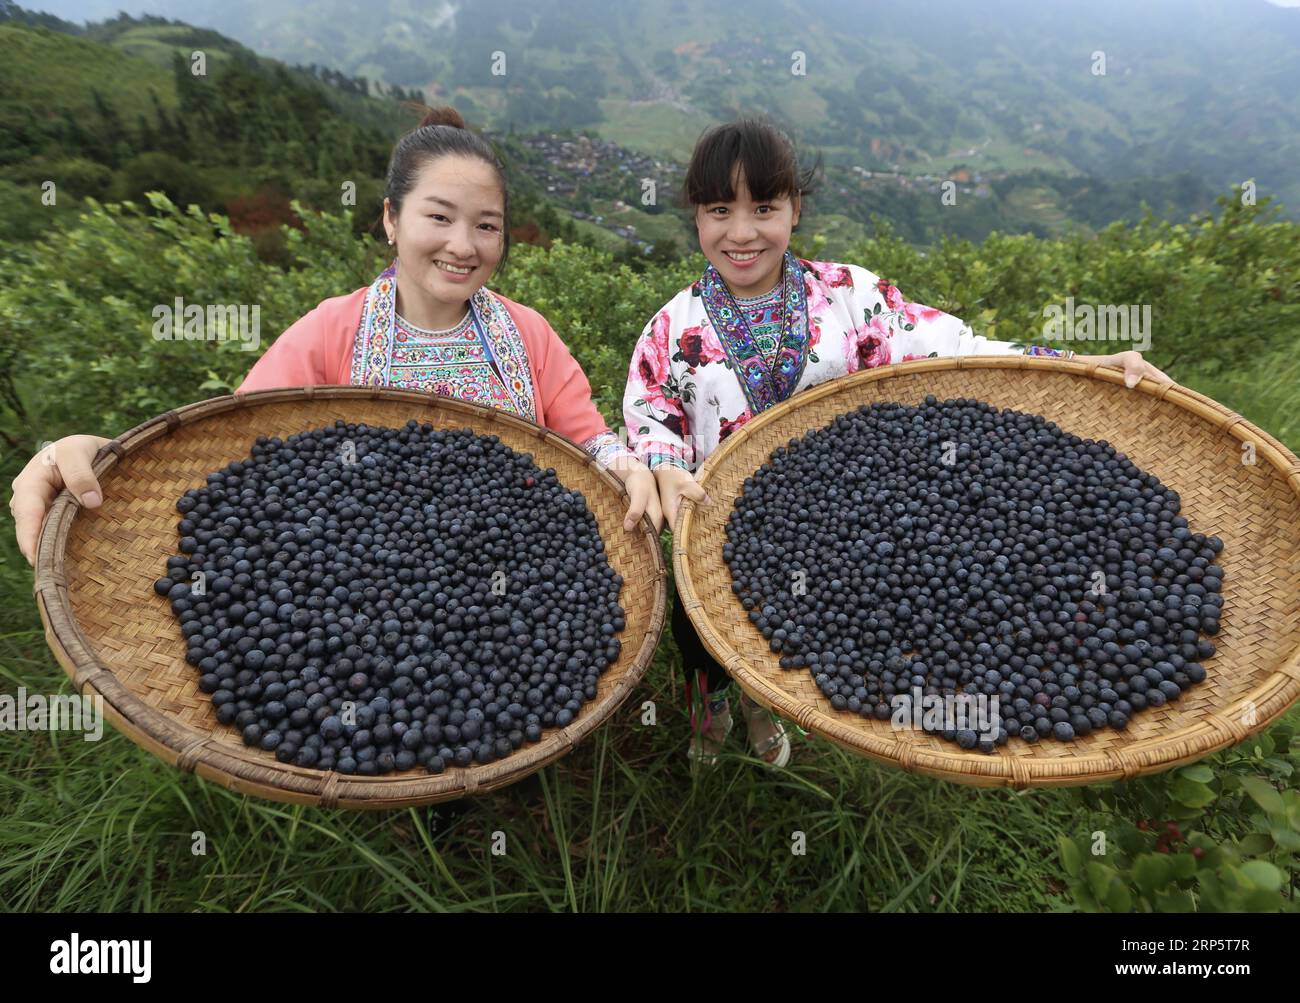 (181223) -- BEIJING, Dec. 23, 2018 (Xinhua) -- Villagers show newly-picked blueberries at a blueberry planting farm in Gaolan Village in Rongshui Miao Autonomous County, south China s Guangxi Zhuang Autonomous Region, June 23, 2018. In recent years, the village has encouraged poverty-stricken villagers to plant blueberry as a way to get rid of poverty. Areas of China suffering from extreme poverty have made faster progress in terms of poverty relief compared to the country s average pace in 2018, an official has said. The country has earnestly pushed ahead with poverty relief efforts in areas Stock Photo